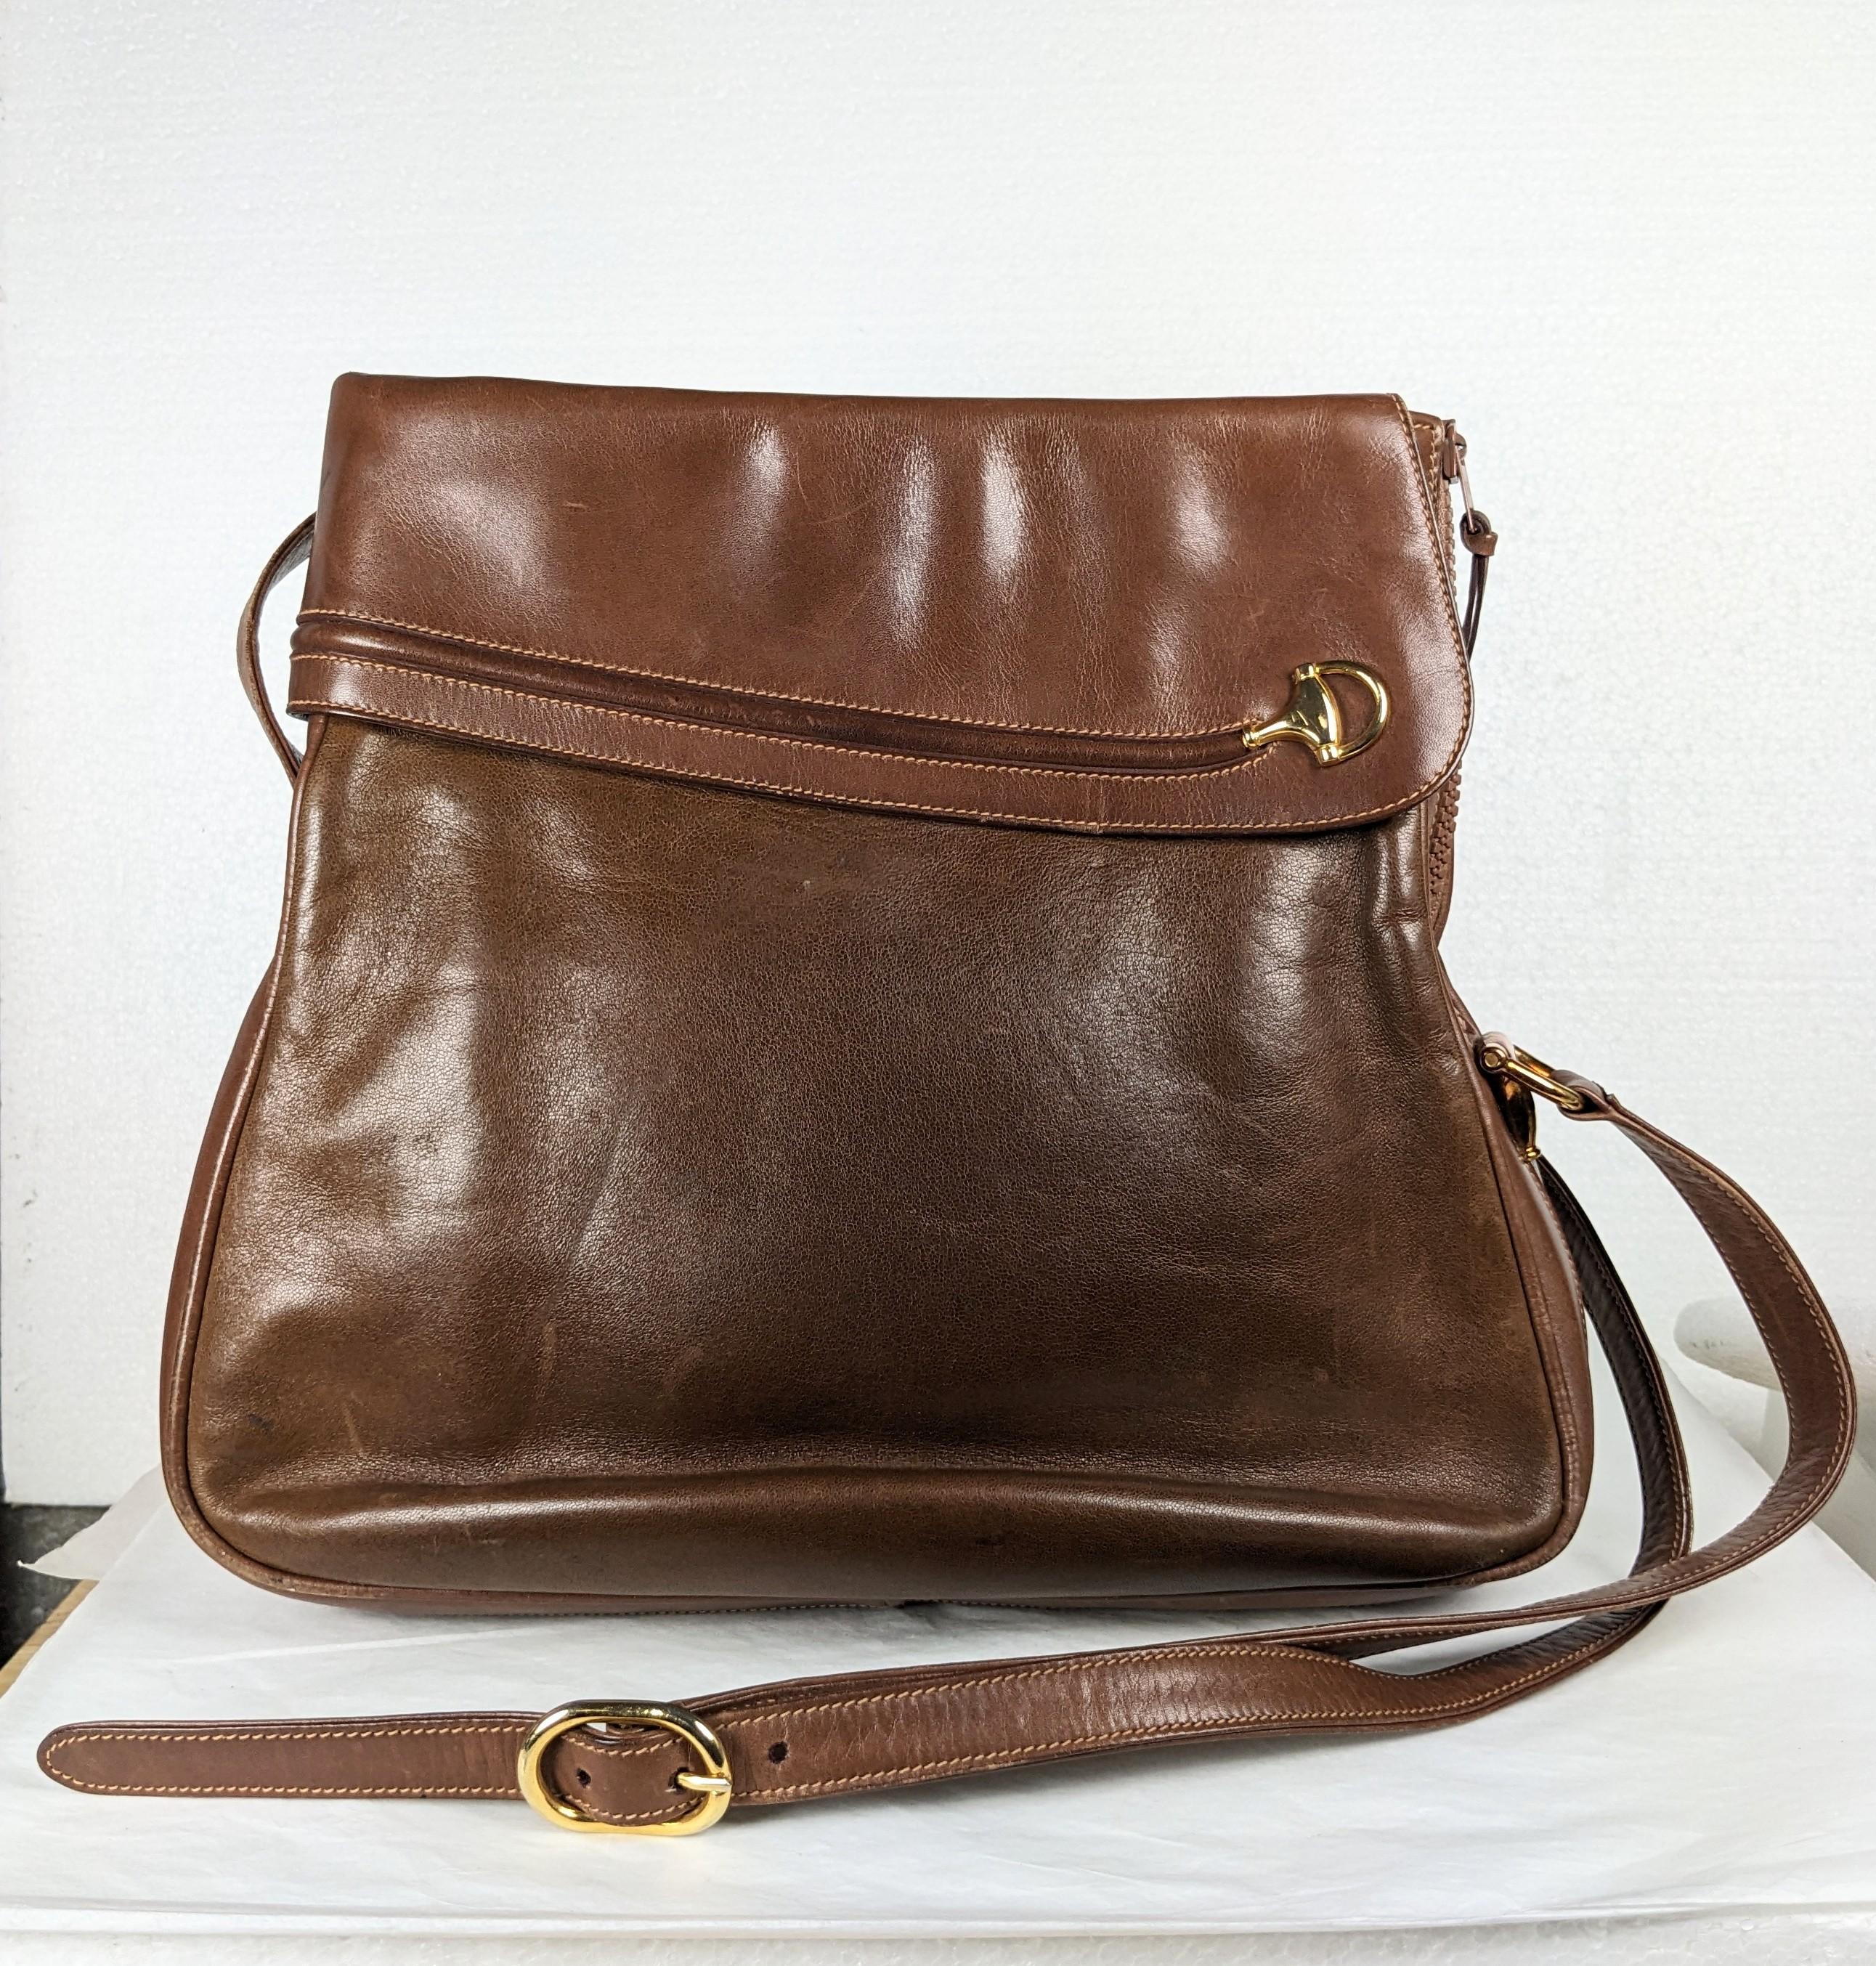 Early and unusual Gucci Bridle Motif Trimmed Leather Bucket Bag from the 1970's Italy. Open top design with side zipper on end of bag for entry. Classic horse inspired design in brown leather with even patination throughout. 1970's Italy. 10